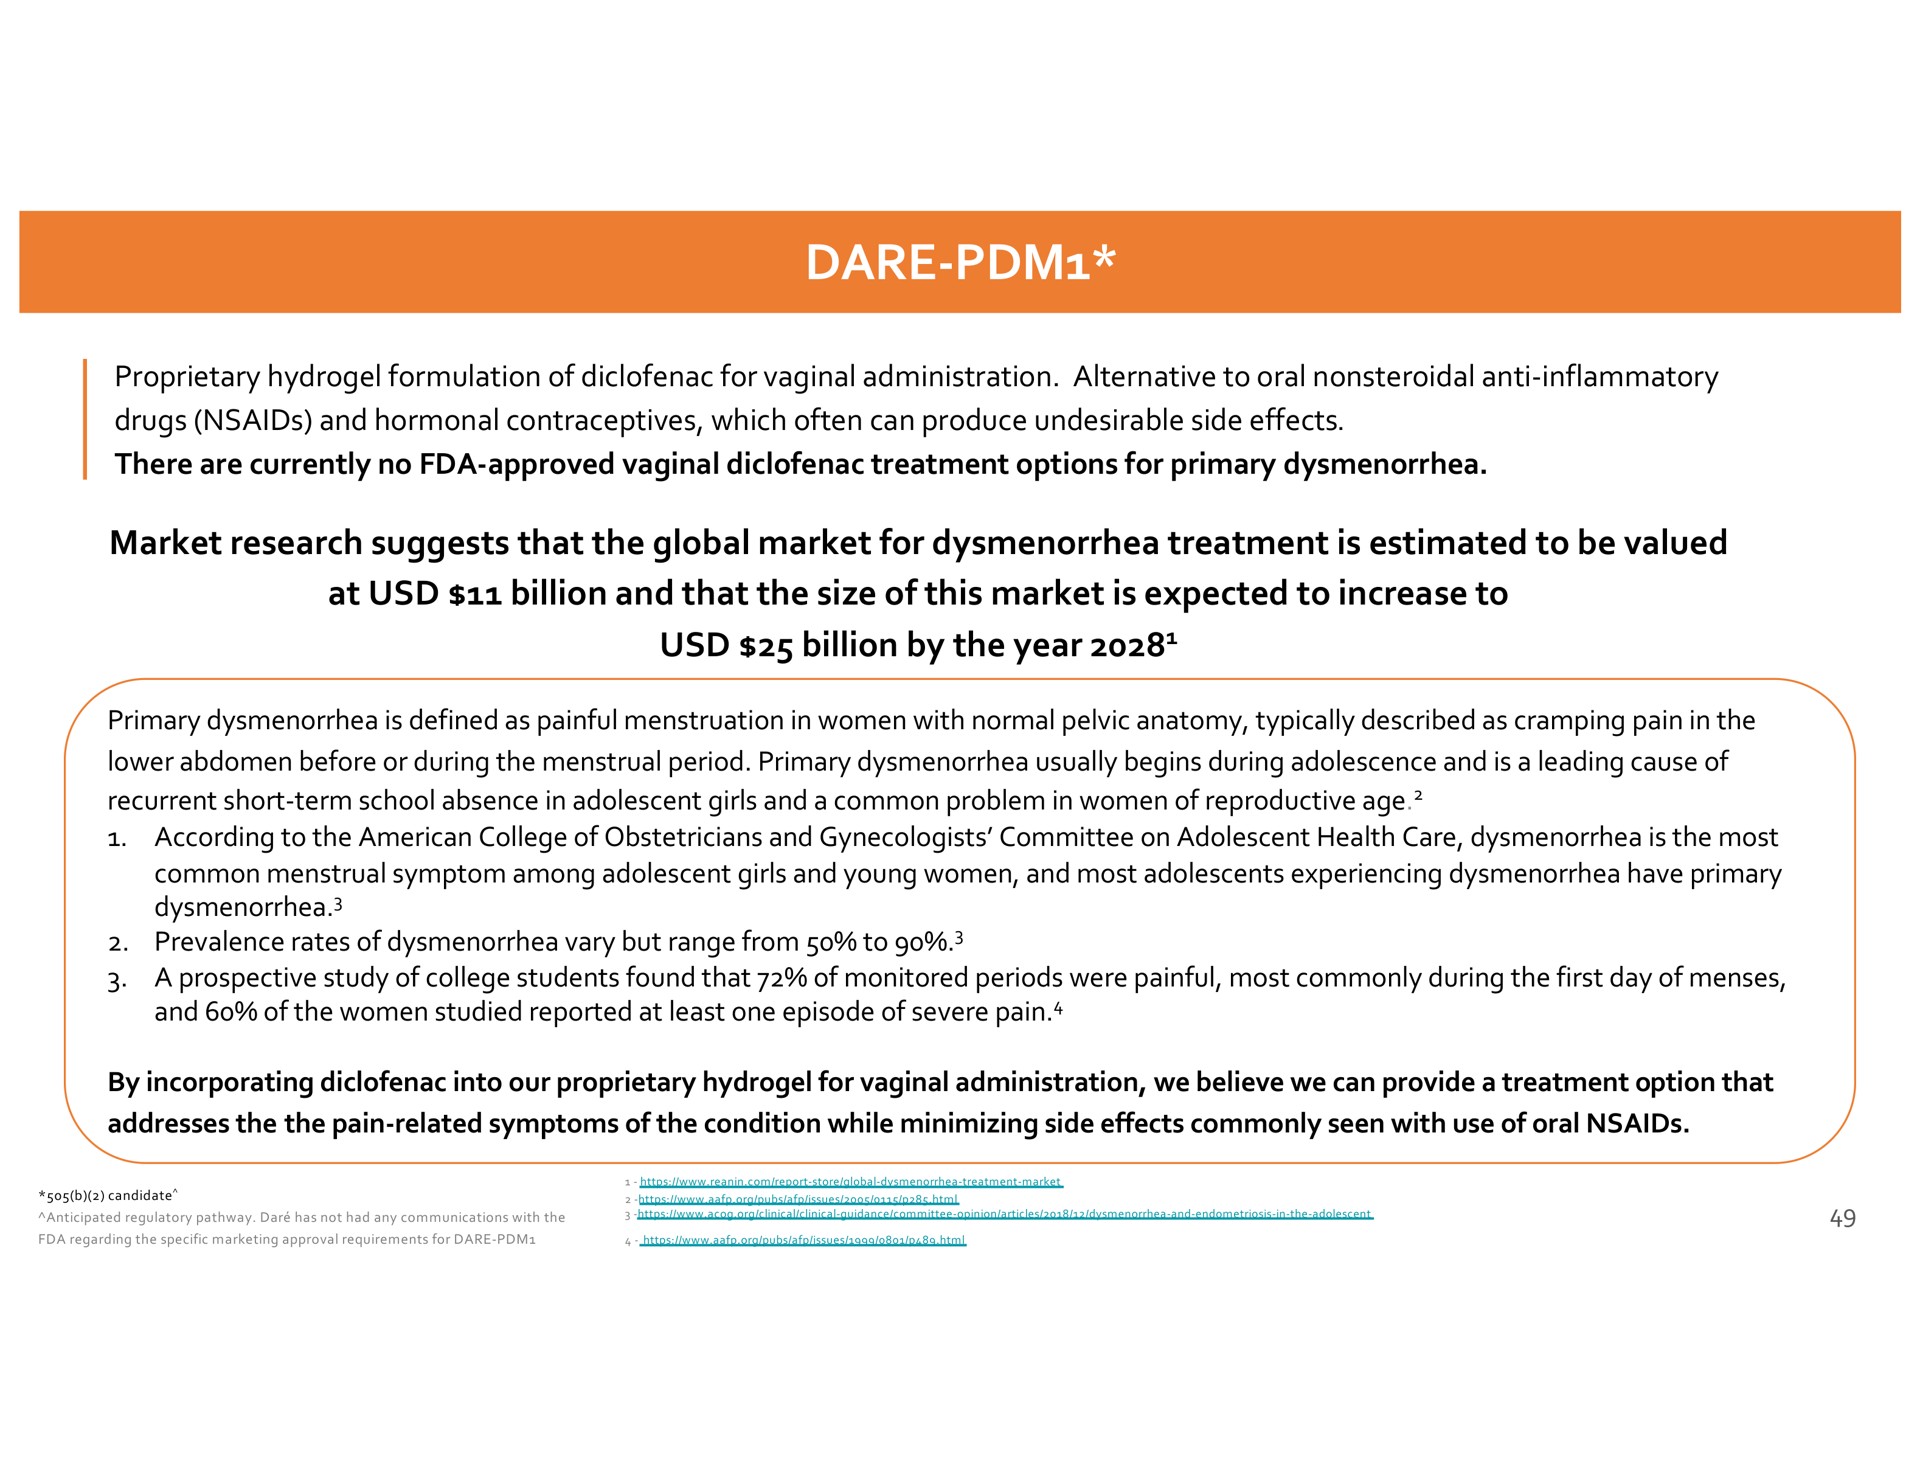 dare market research suggests that the global market for dysmenorrhea treatment is estimated to be valued at billion and that the size of this market is expected to increase to billion by the year | Dare Bioscience